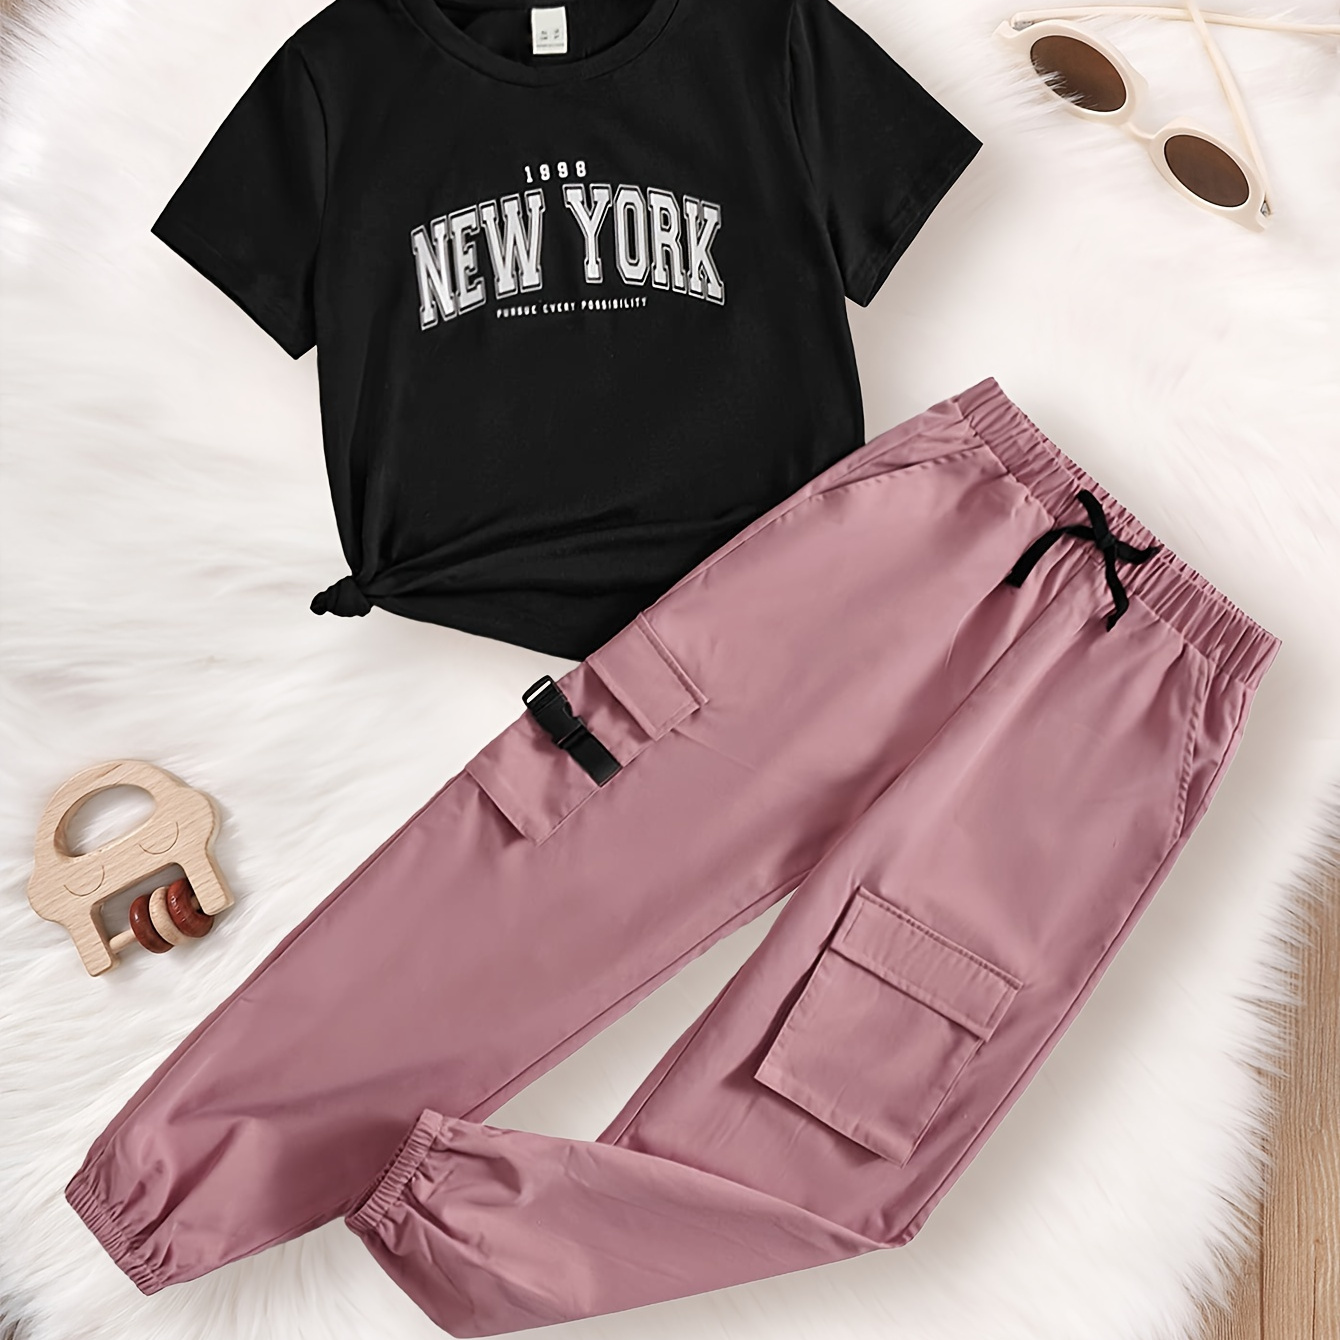 

New York Print Girl's 2pcs Short-sleeve T-shirt Top & Cargo Pants Set, Casual Two-piece Summer Clothes